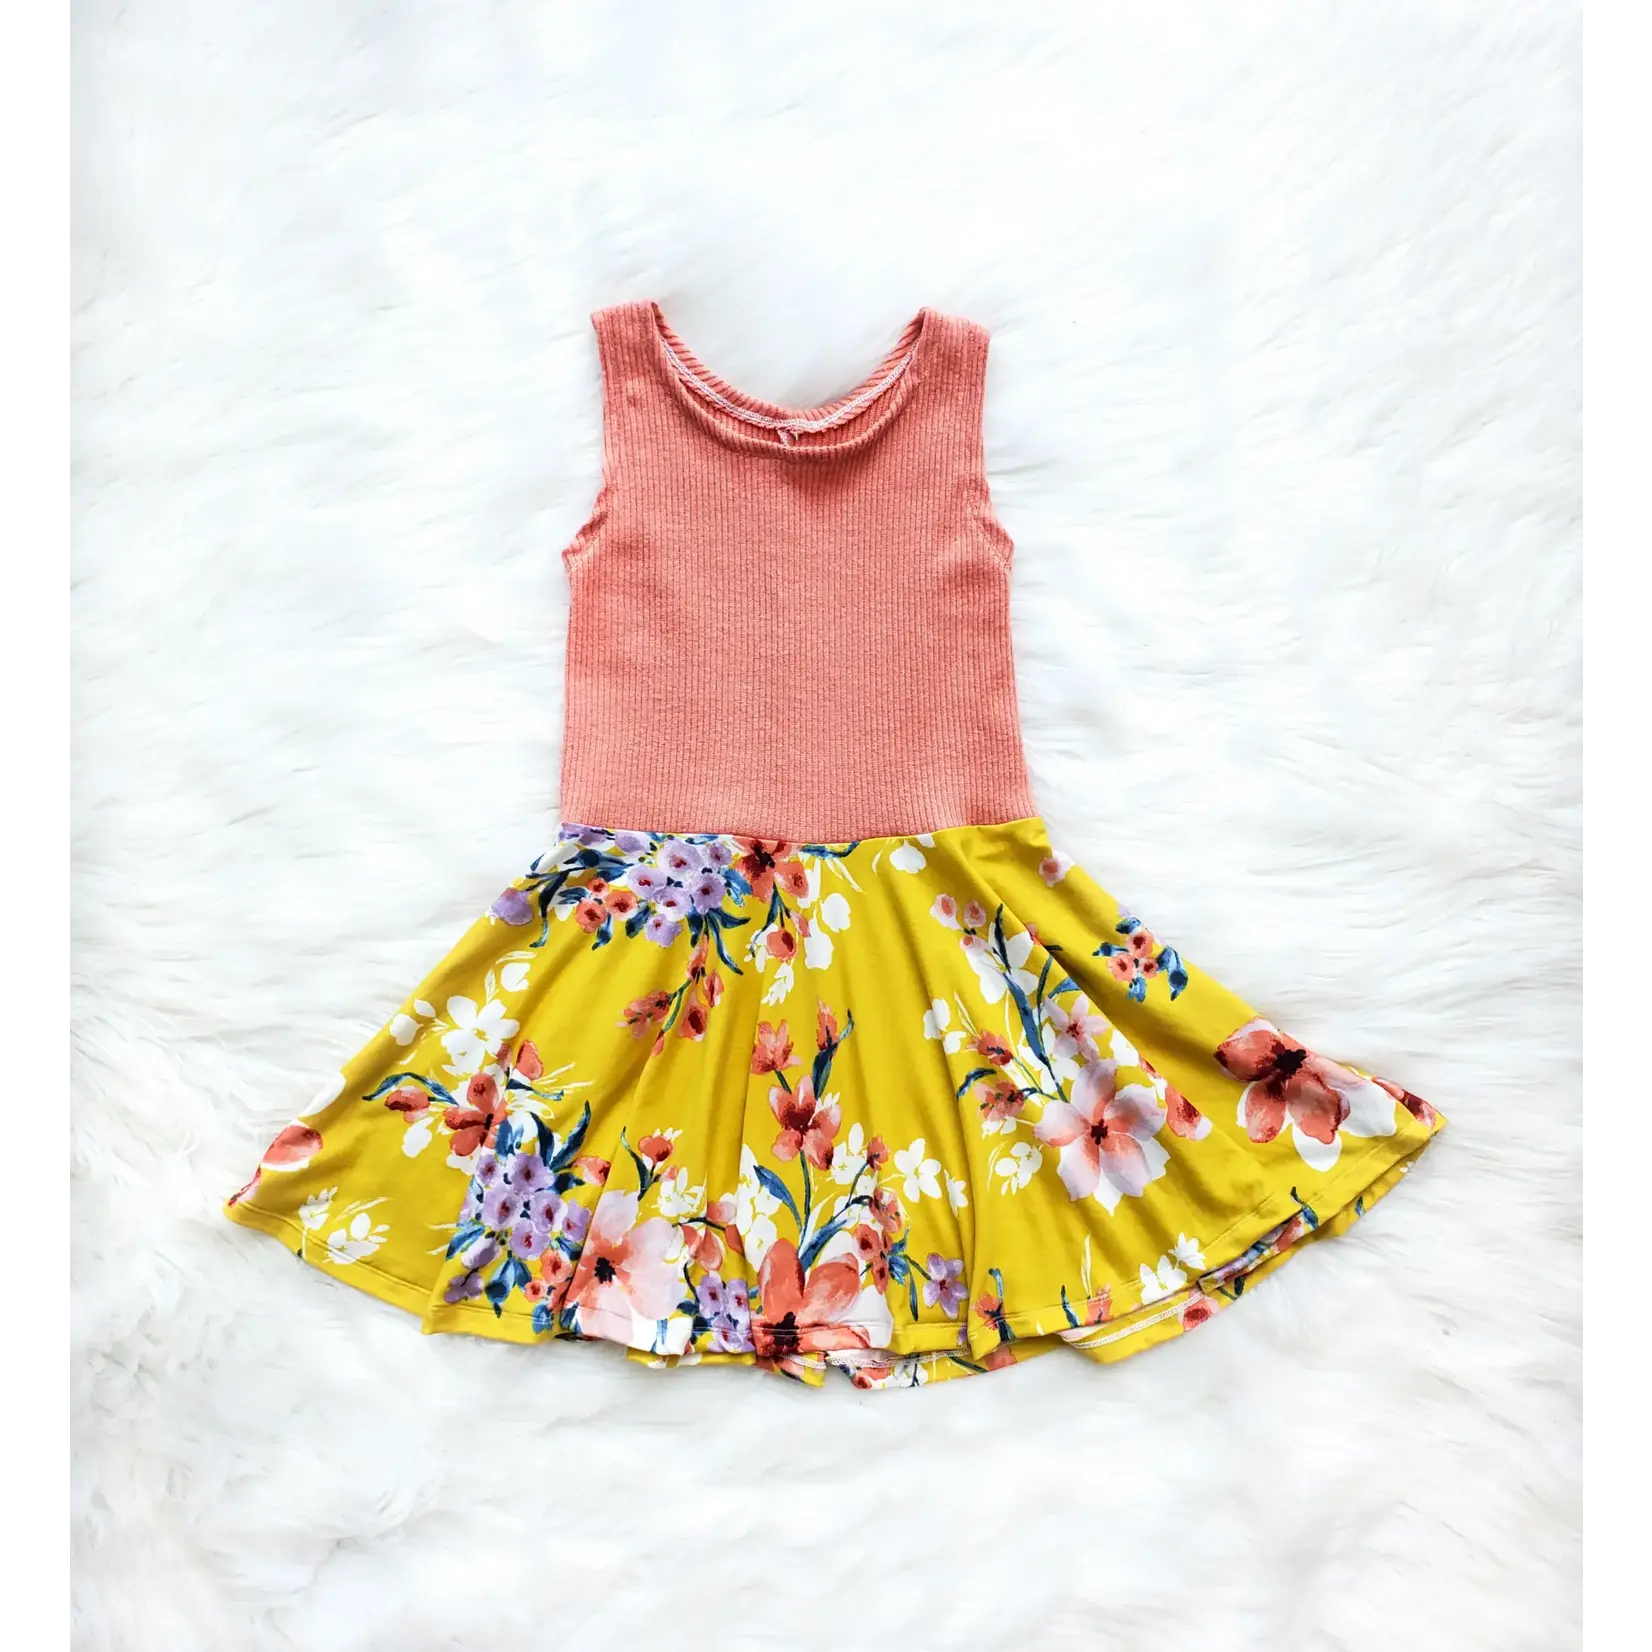 Landy Lou and Devie Too Peach & Mustard Floral Twirl Dress - Toddler